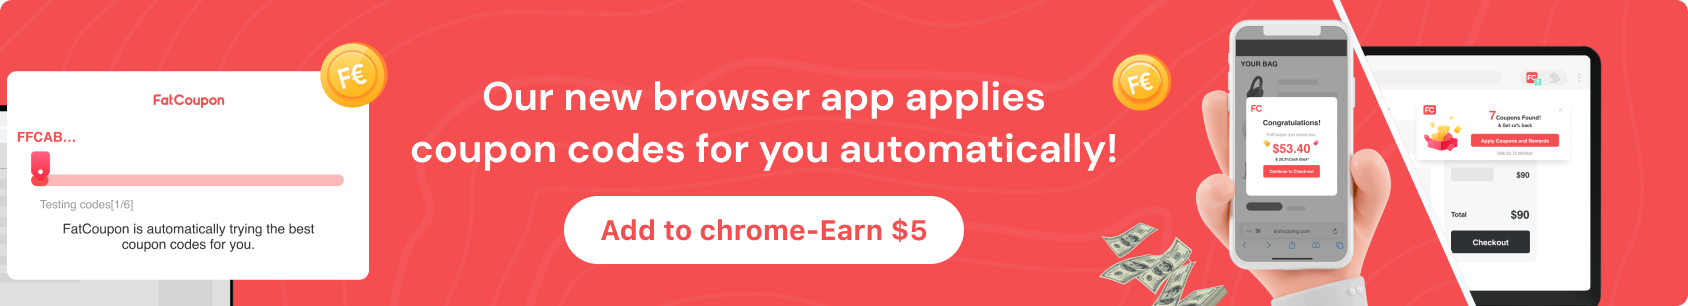 Our new browser app reveals coupon codes for you automatically!